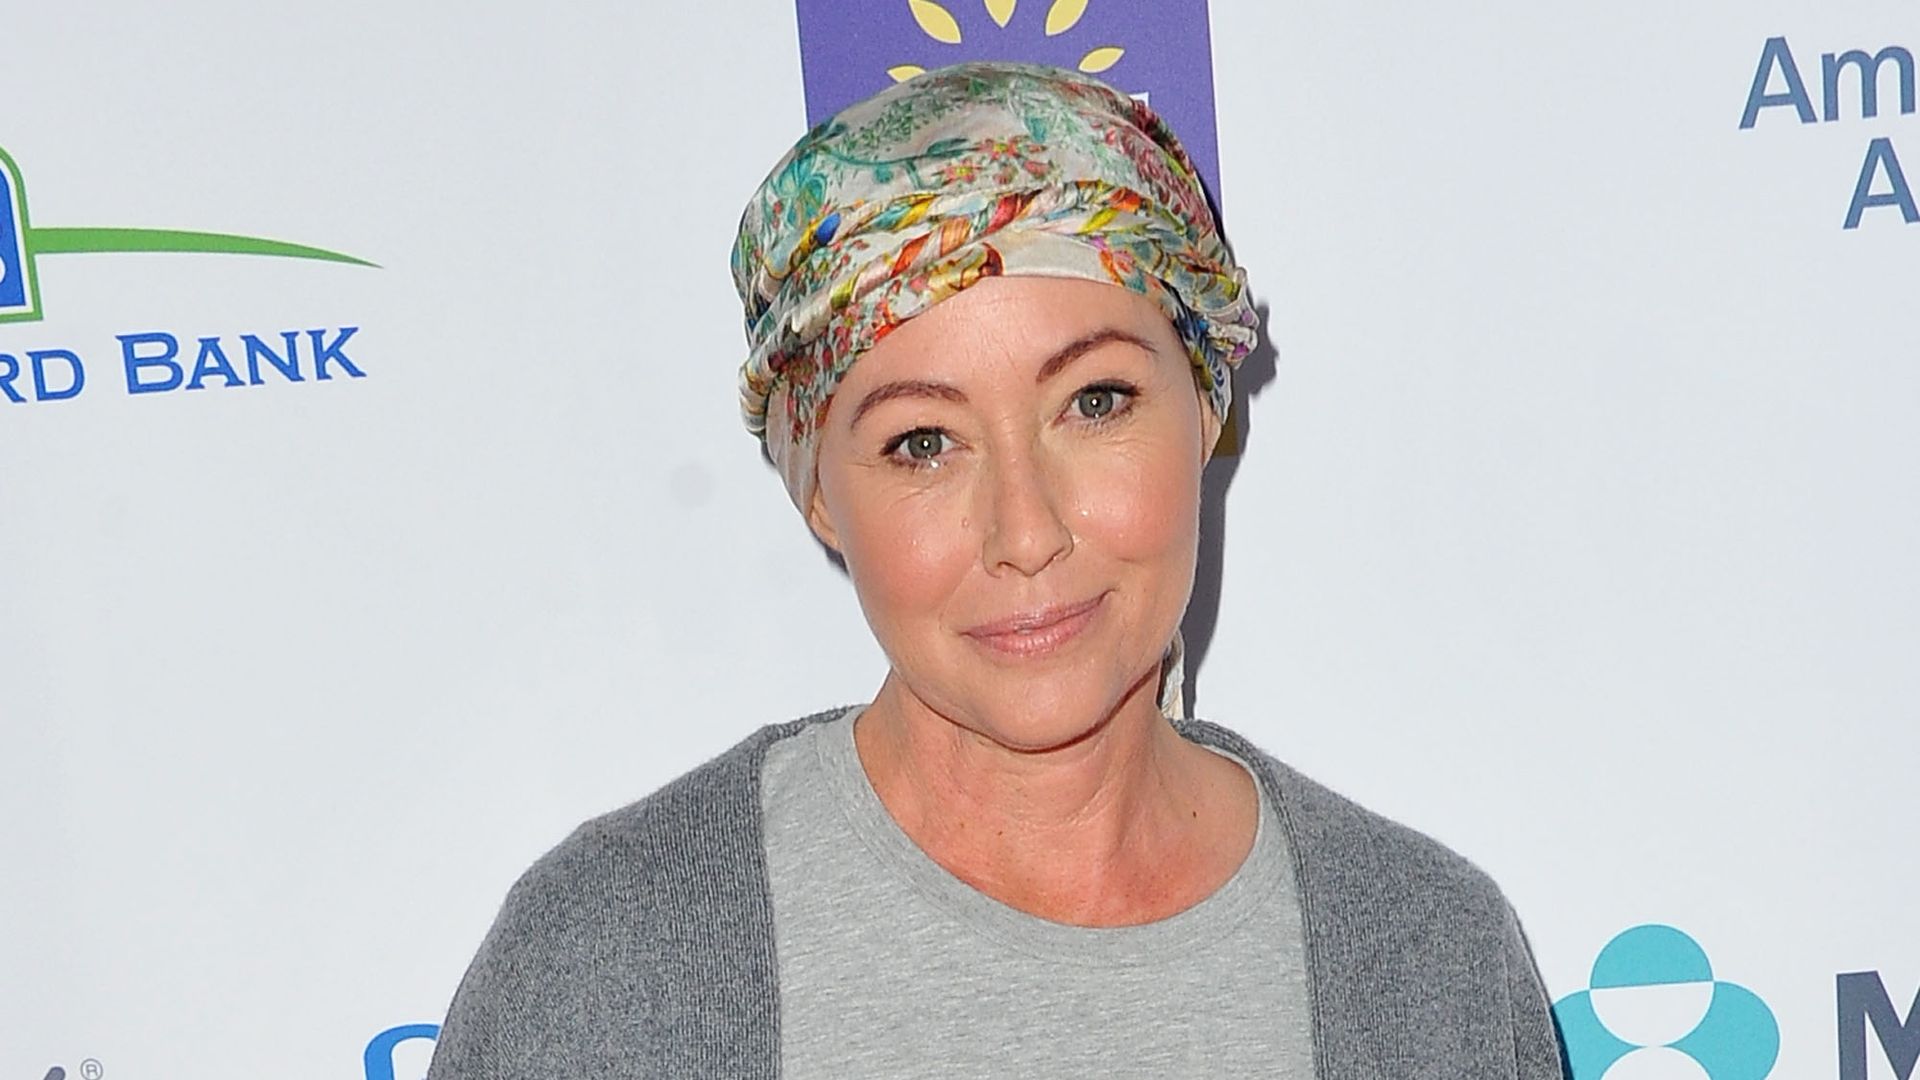 Shannen Doherty's cancer battle: From initial diagnosis to heartbreaking funeral plans